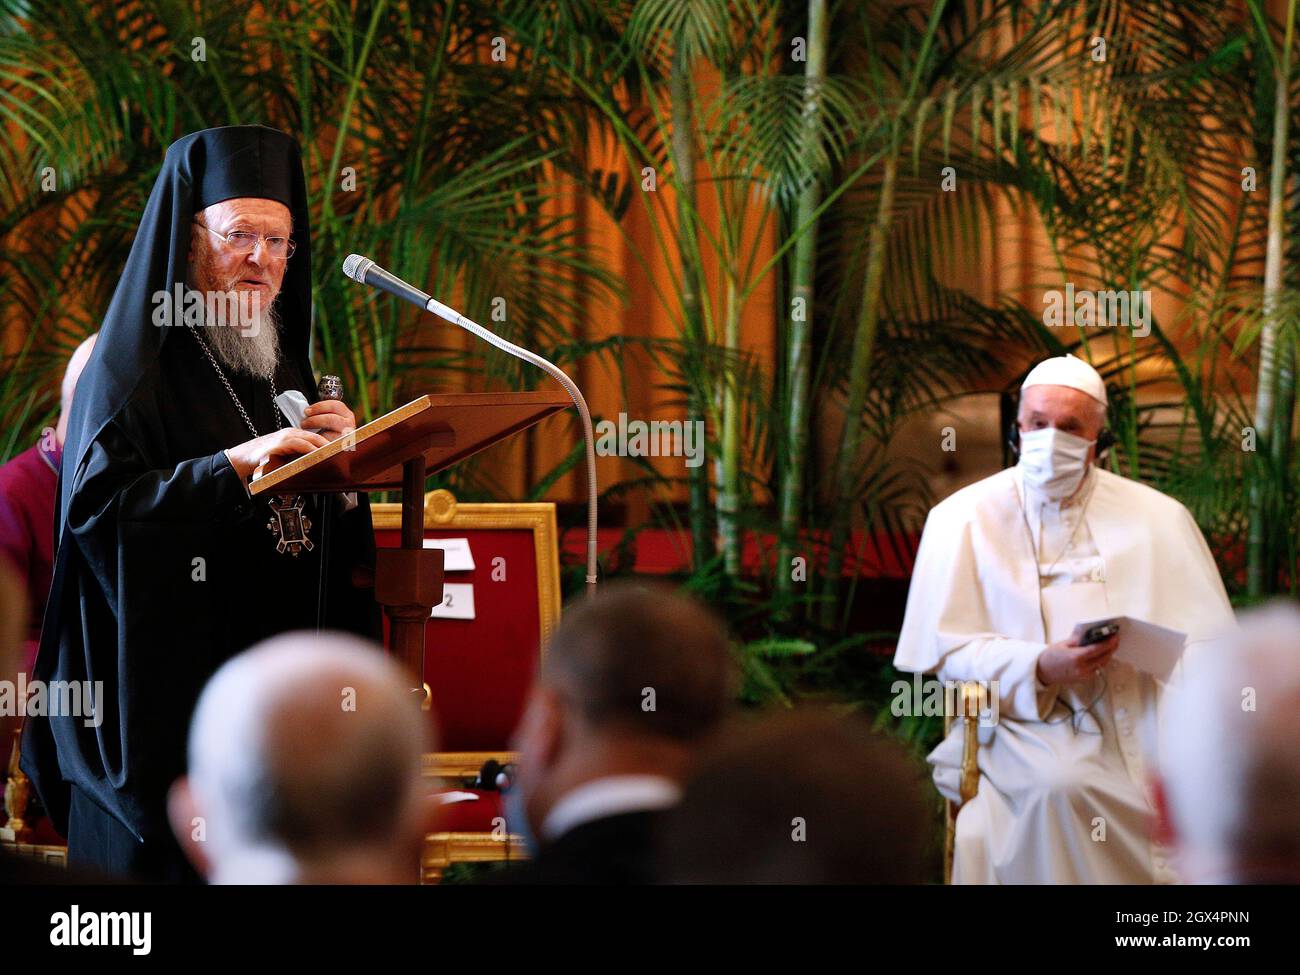 Vatican. 04th Oct, 2021. Orthodox Patriarch Bartholomew of Constantinople addresses the meeting, Faith and Science: Towards COP26, with Pope Francis and other religious leaders in the Hall of Benedictions at the Vatican Oct. 4, 2021. The meeting was part of the run-up to the U.N. Climate Change Conference, called COP26, in Glasgow, Scotland, Oct. 31 to Nov. 12, 2021. Credit: dpa picture alliance/Alamy Live News Stock Photo